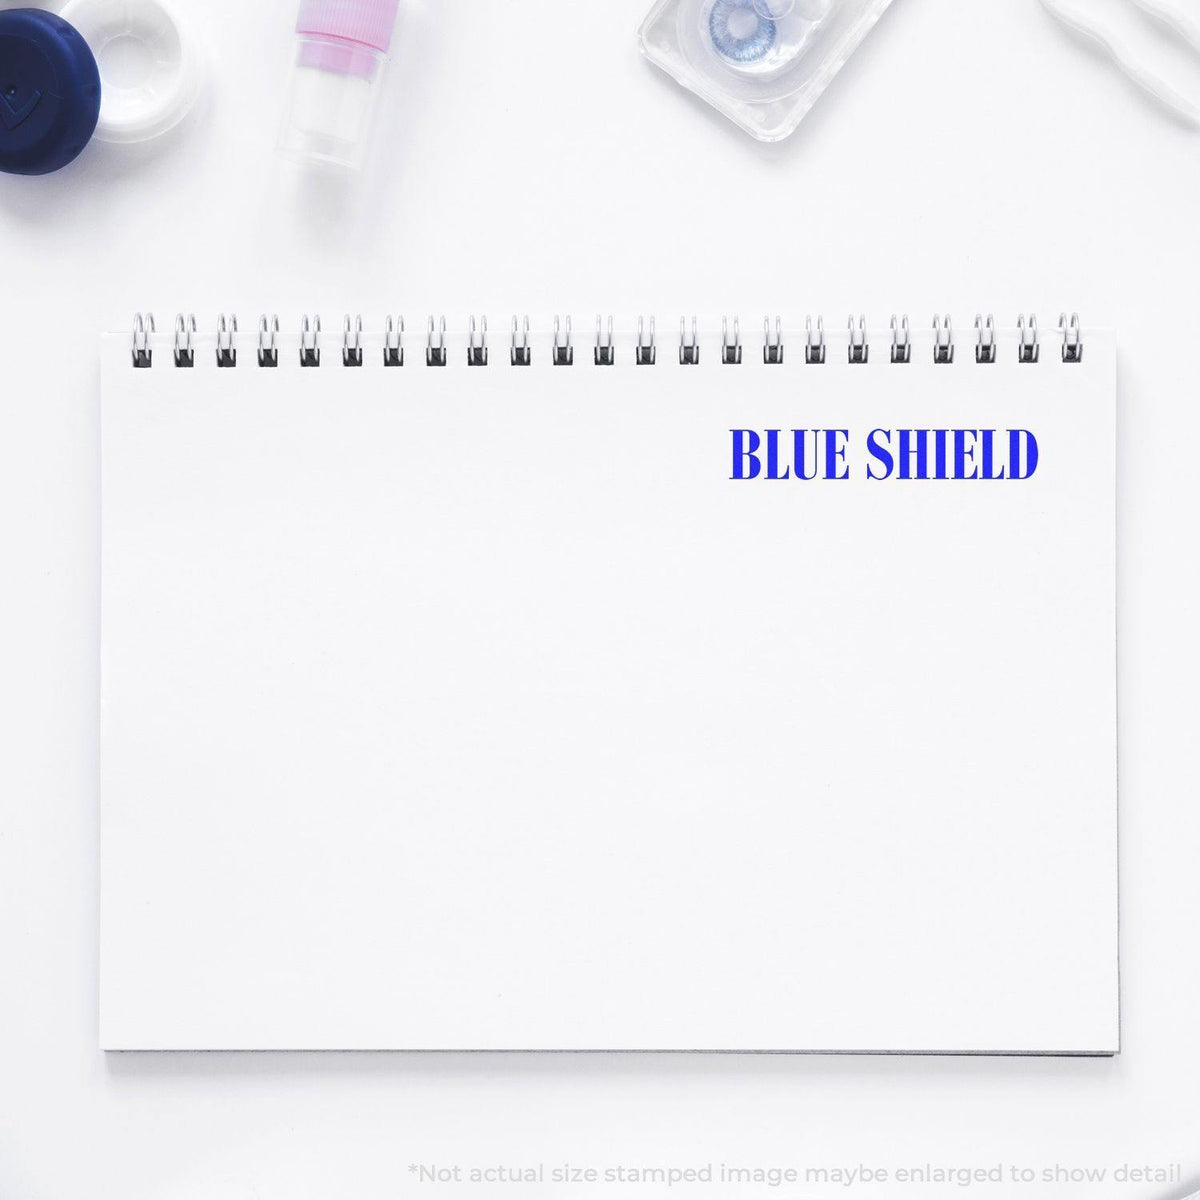 Blue Shield Rubber Stamp In Use Photo